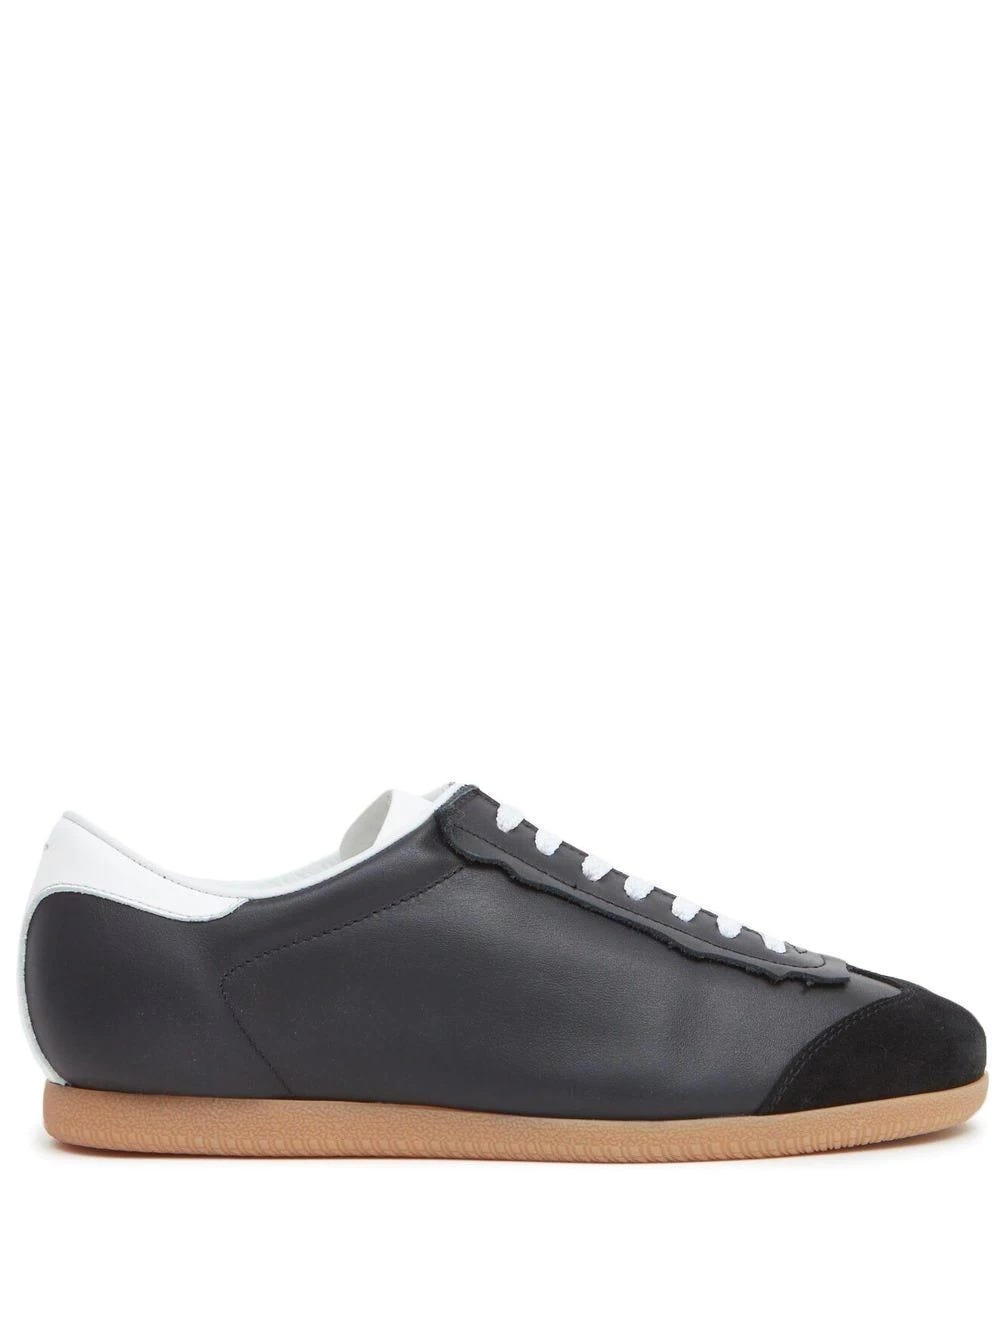 MAISON MARGIELA BLACK LEATHER TRAINERS WITH SUEDE TOE